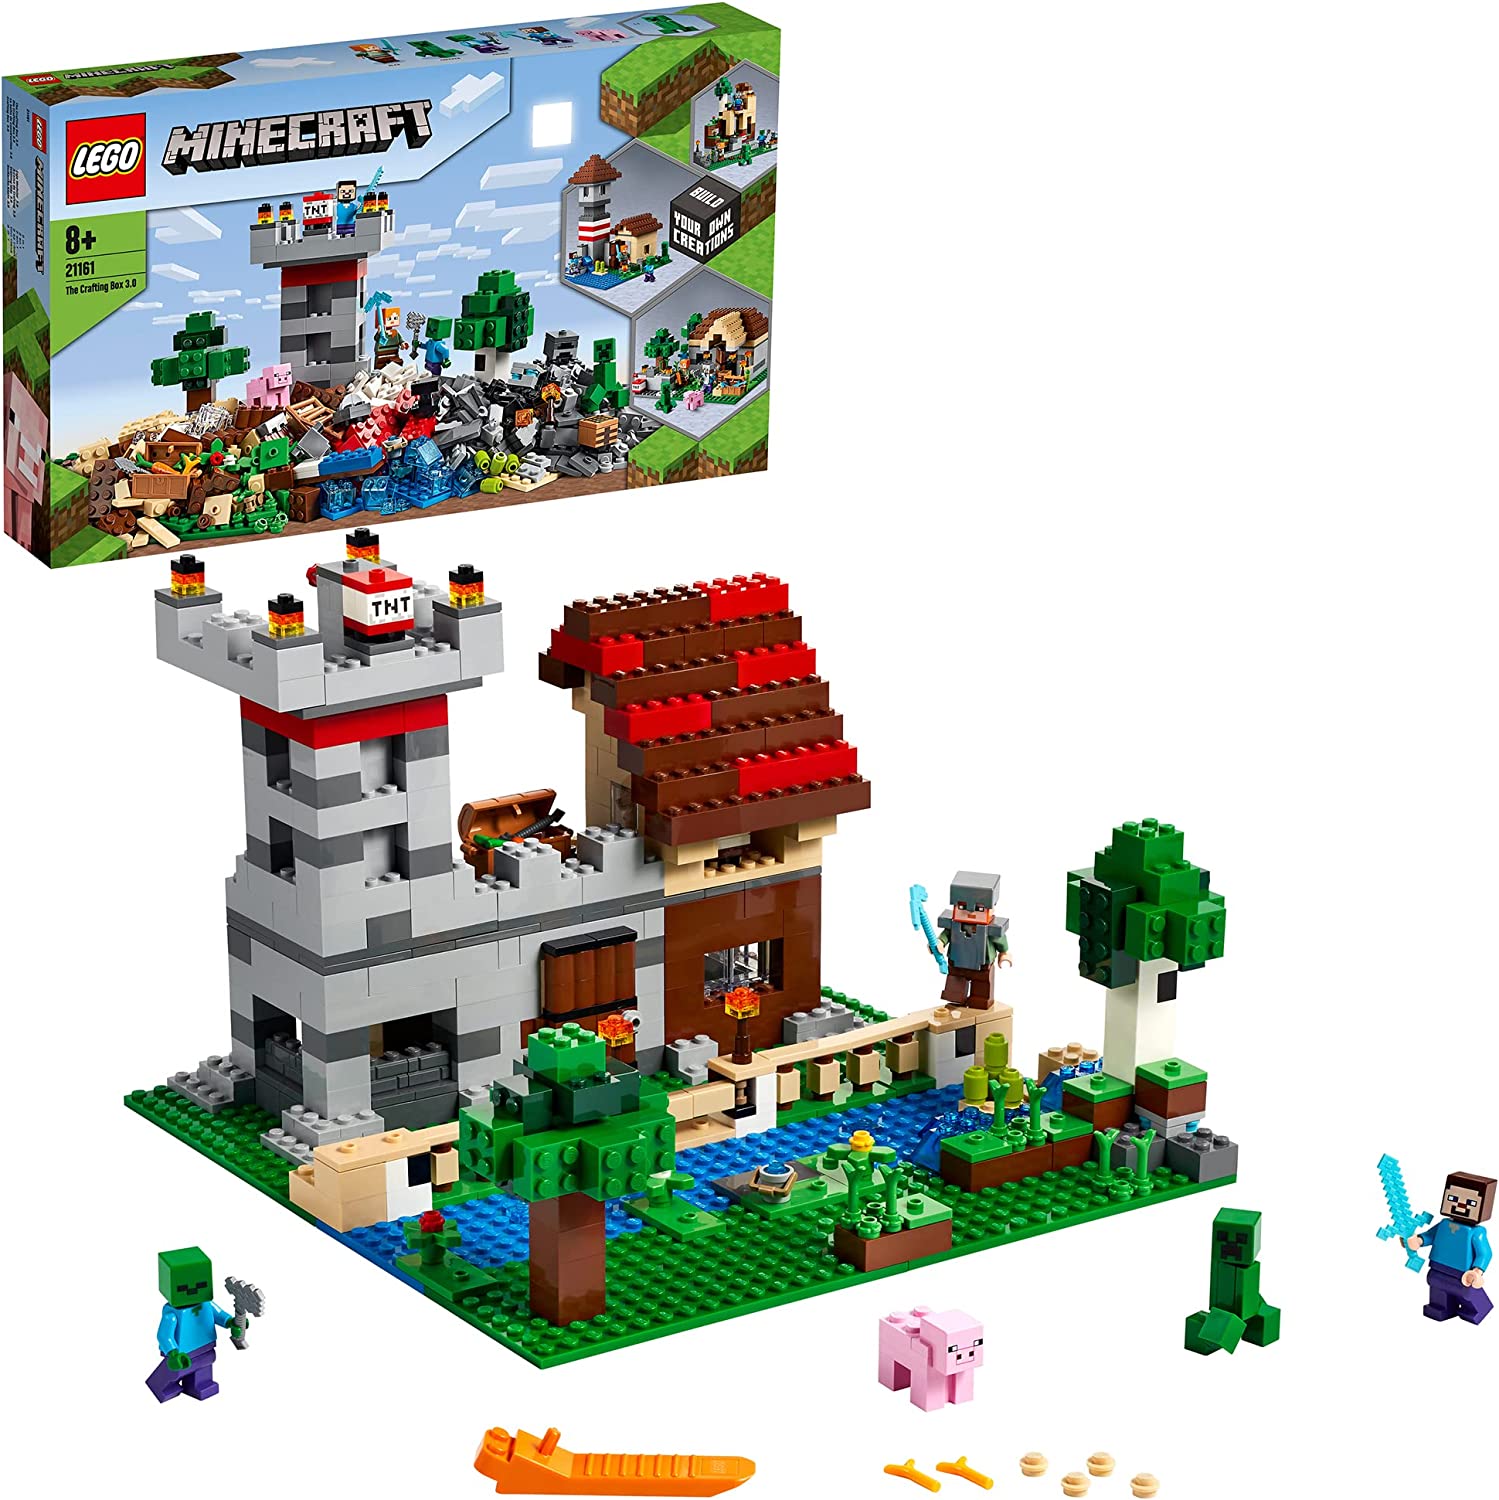 LEGO 21161 Minecraft The Crafting Box 3.0, 2-in-1 Set with Castle or Farm, with Figures: Steve, Alex and Creeper.